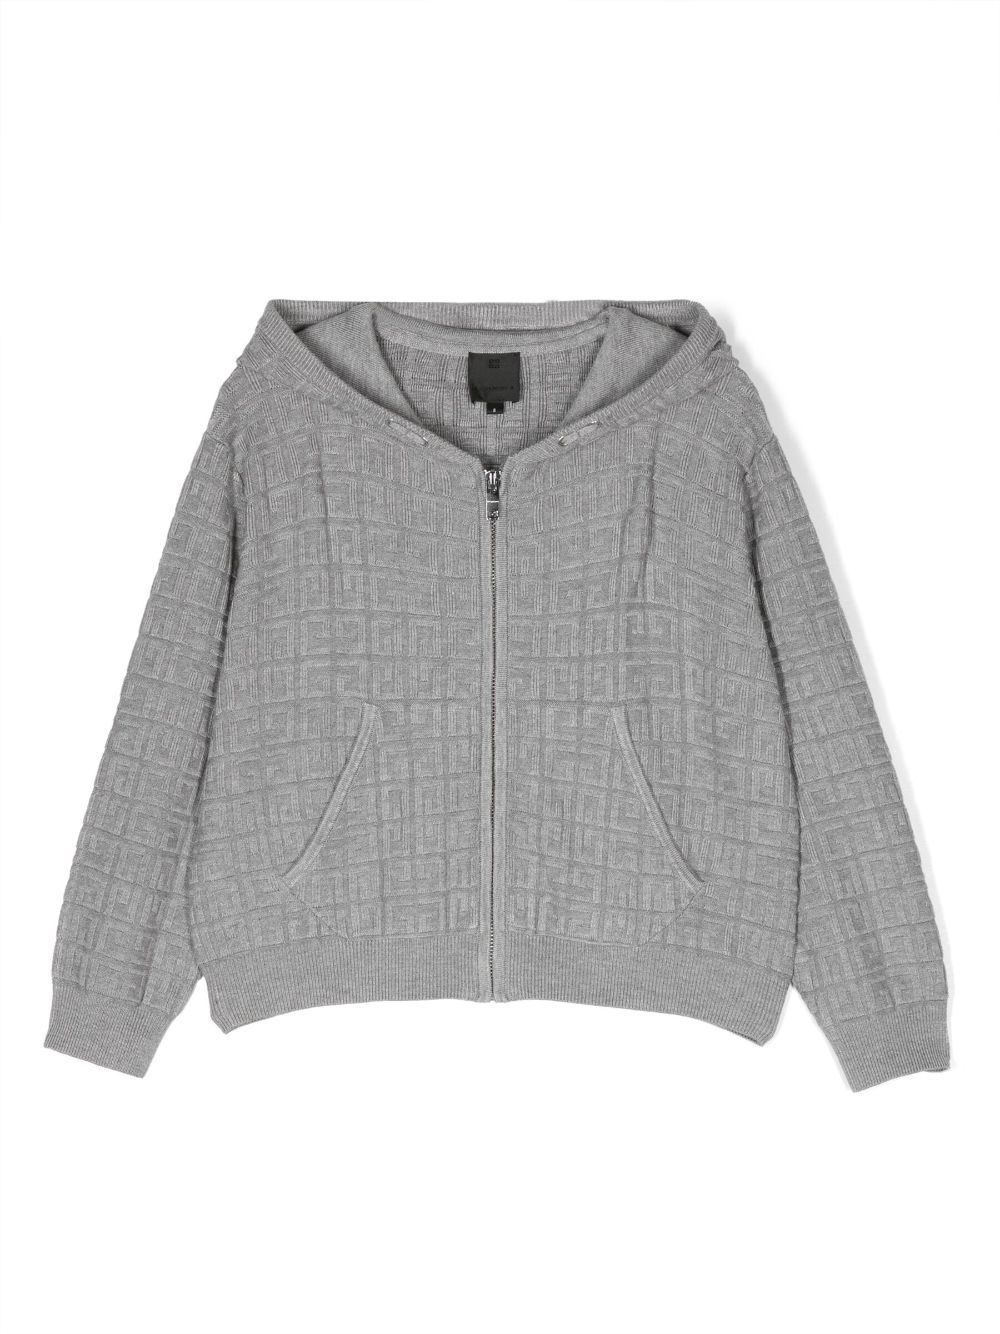 Givenchy Kids patterned-jacquard knitted cardigan - Grey